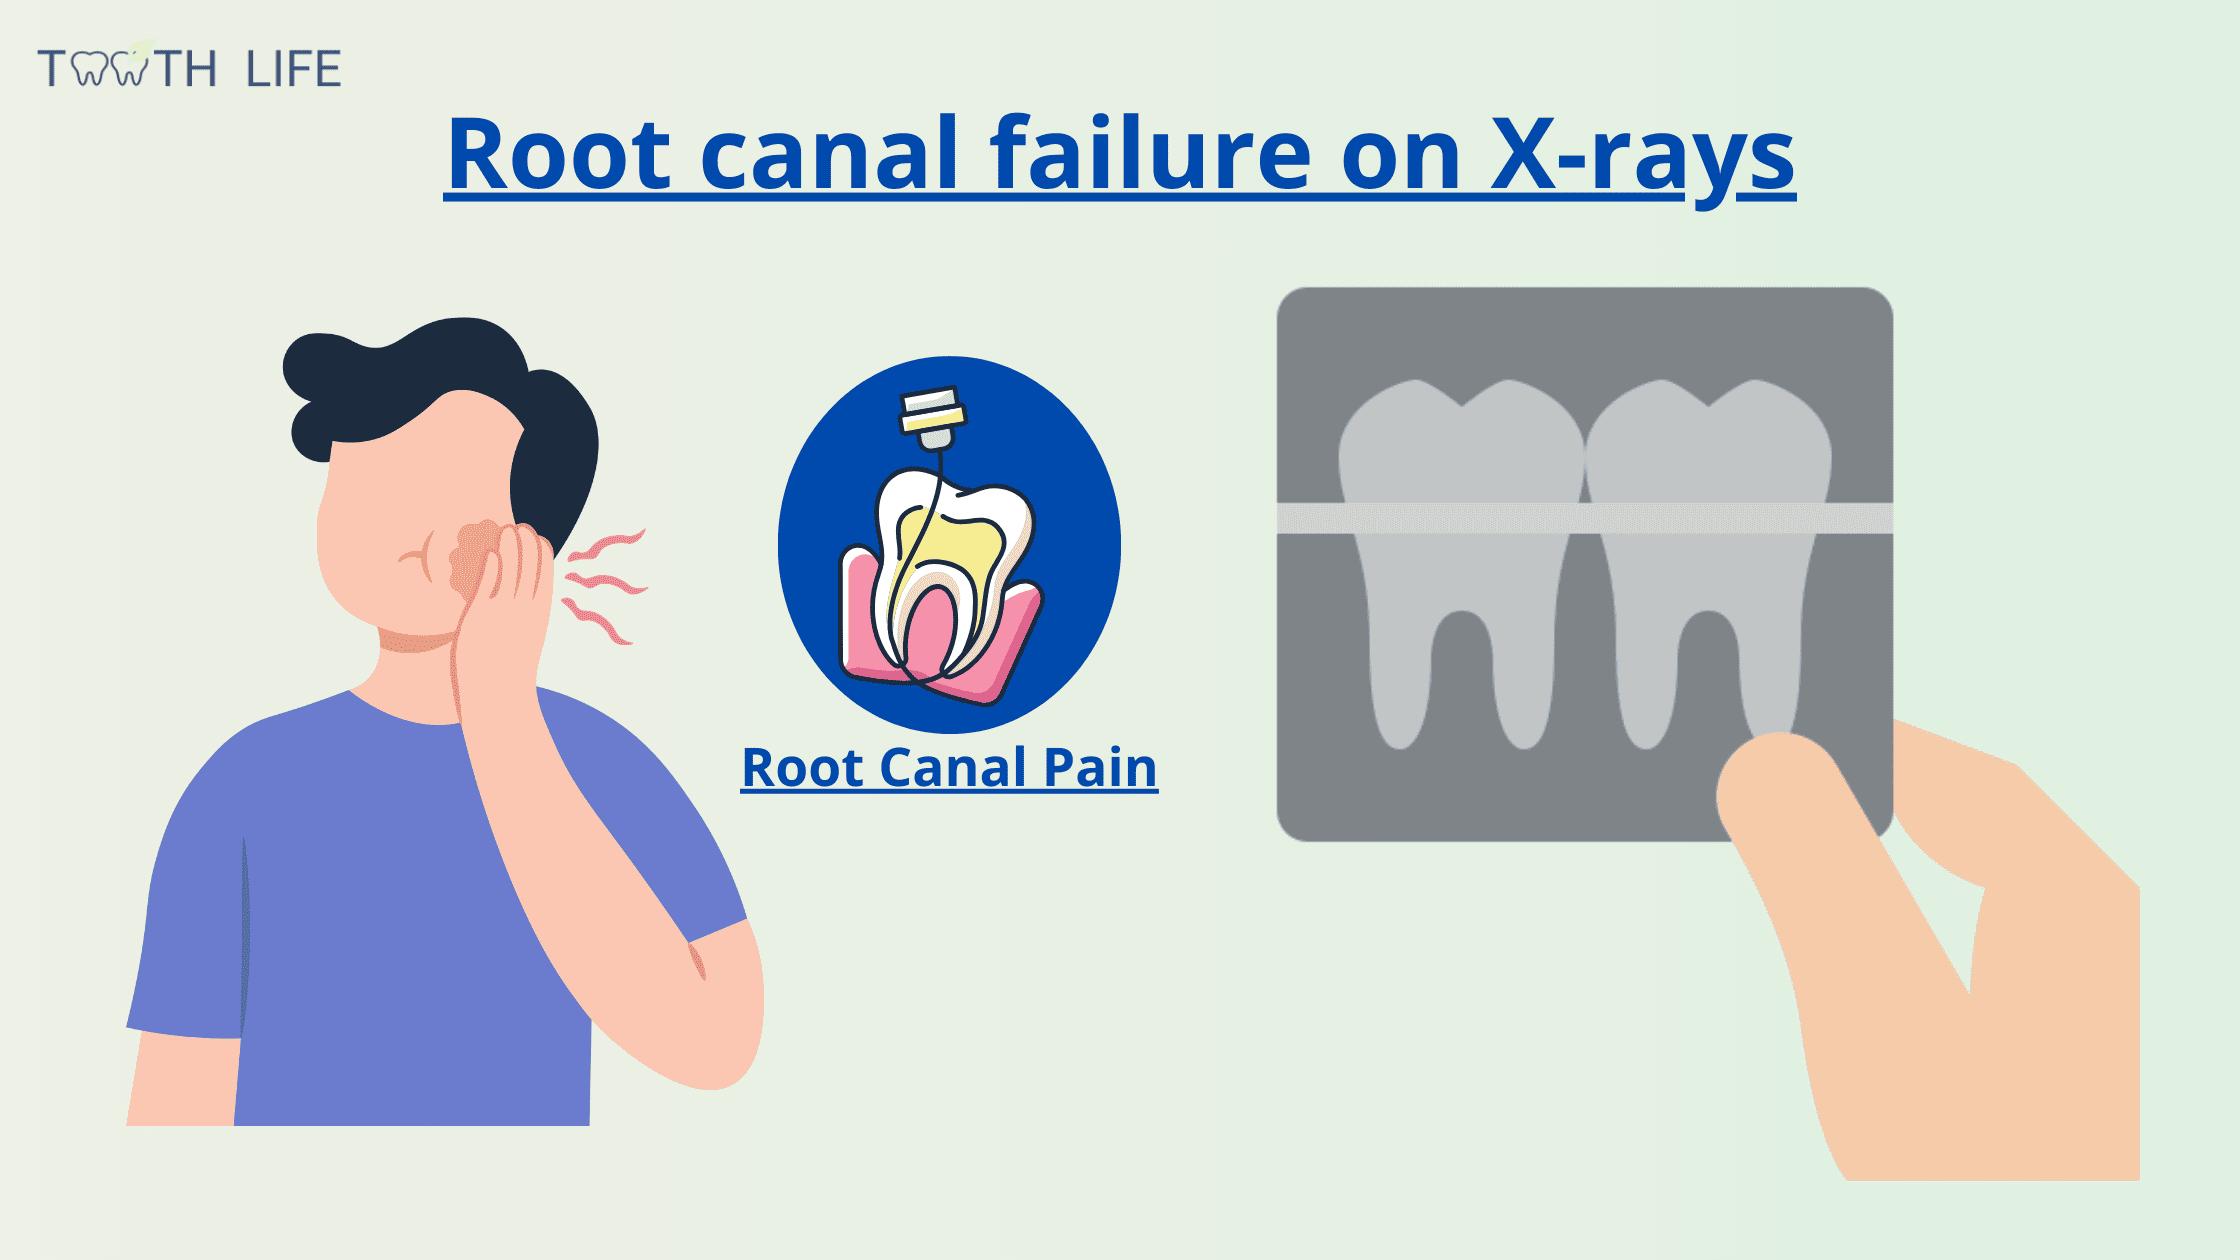 X-rays and root canal failure